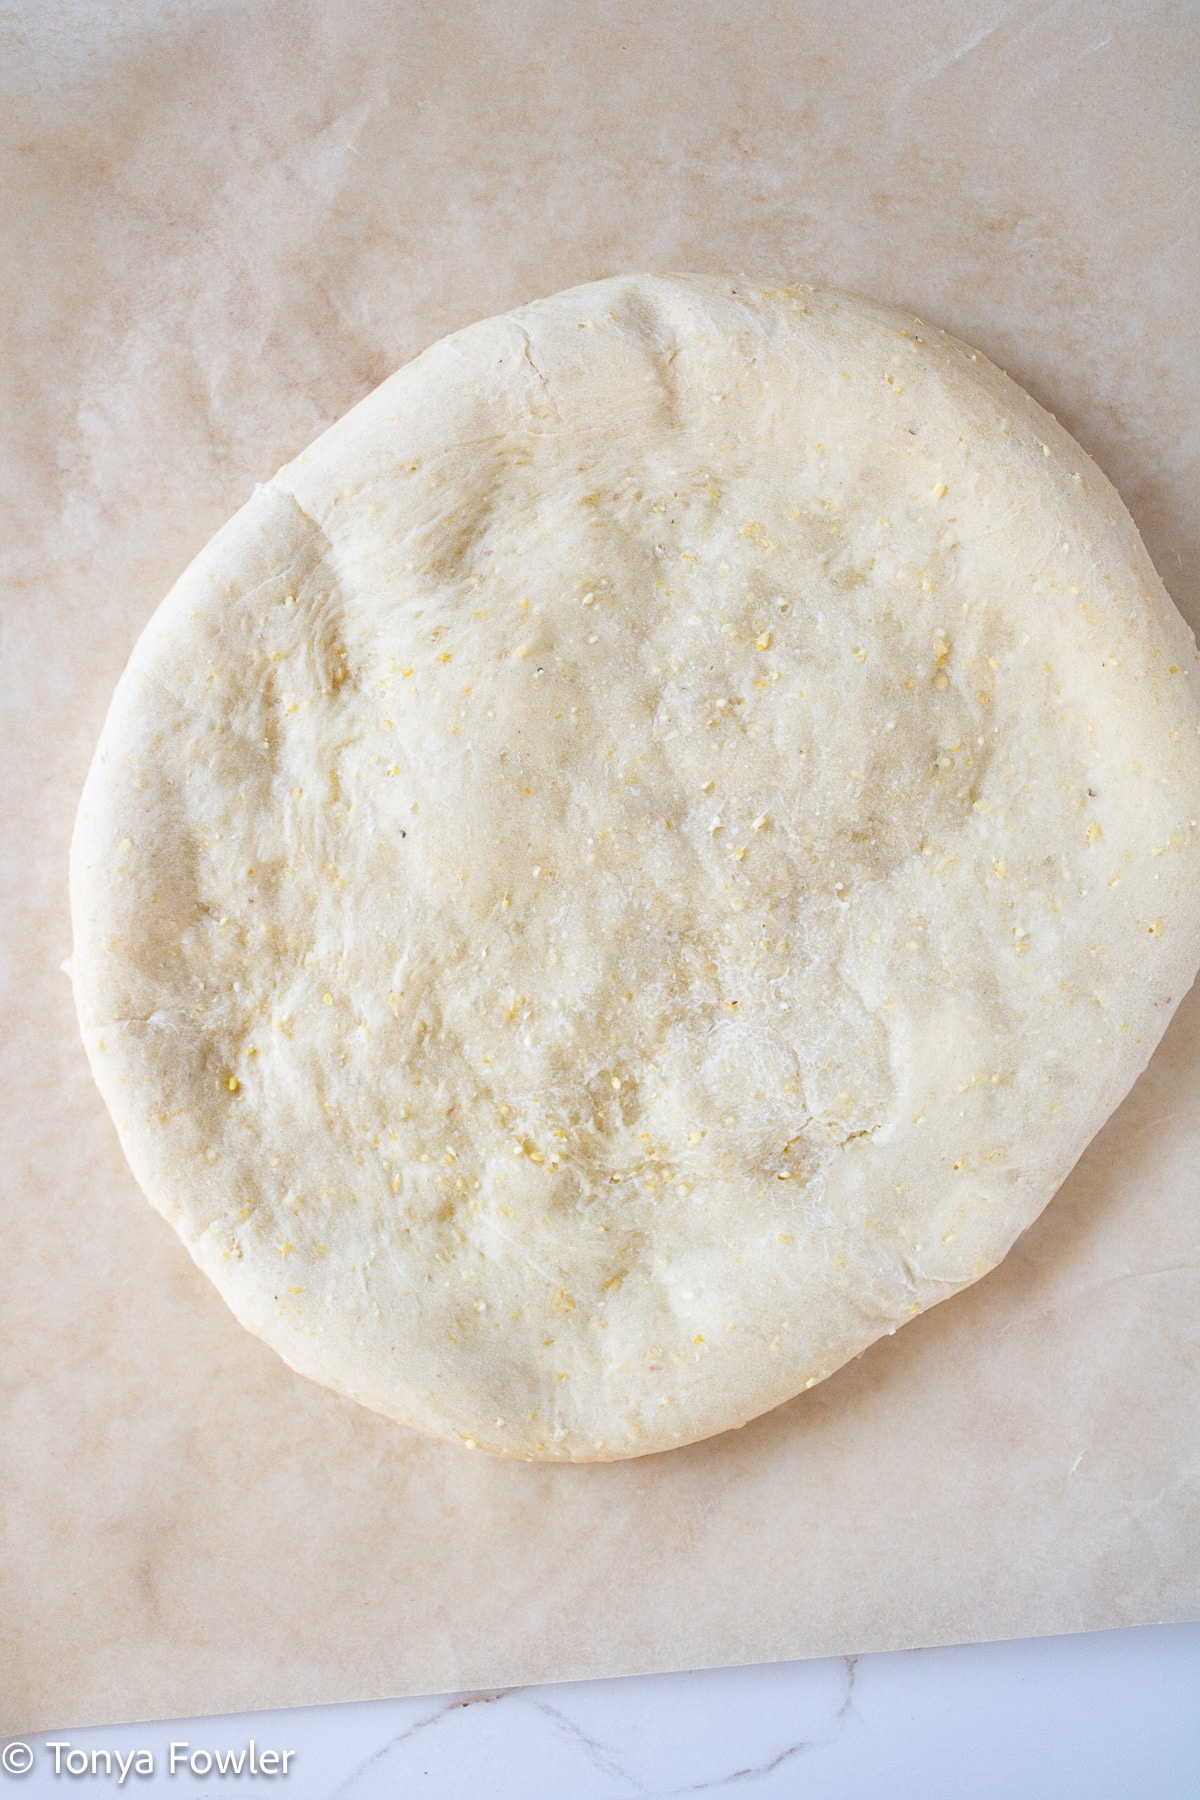 Baked pizza crust on parchment paper.